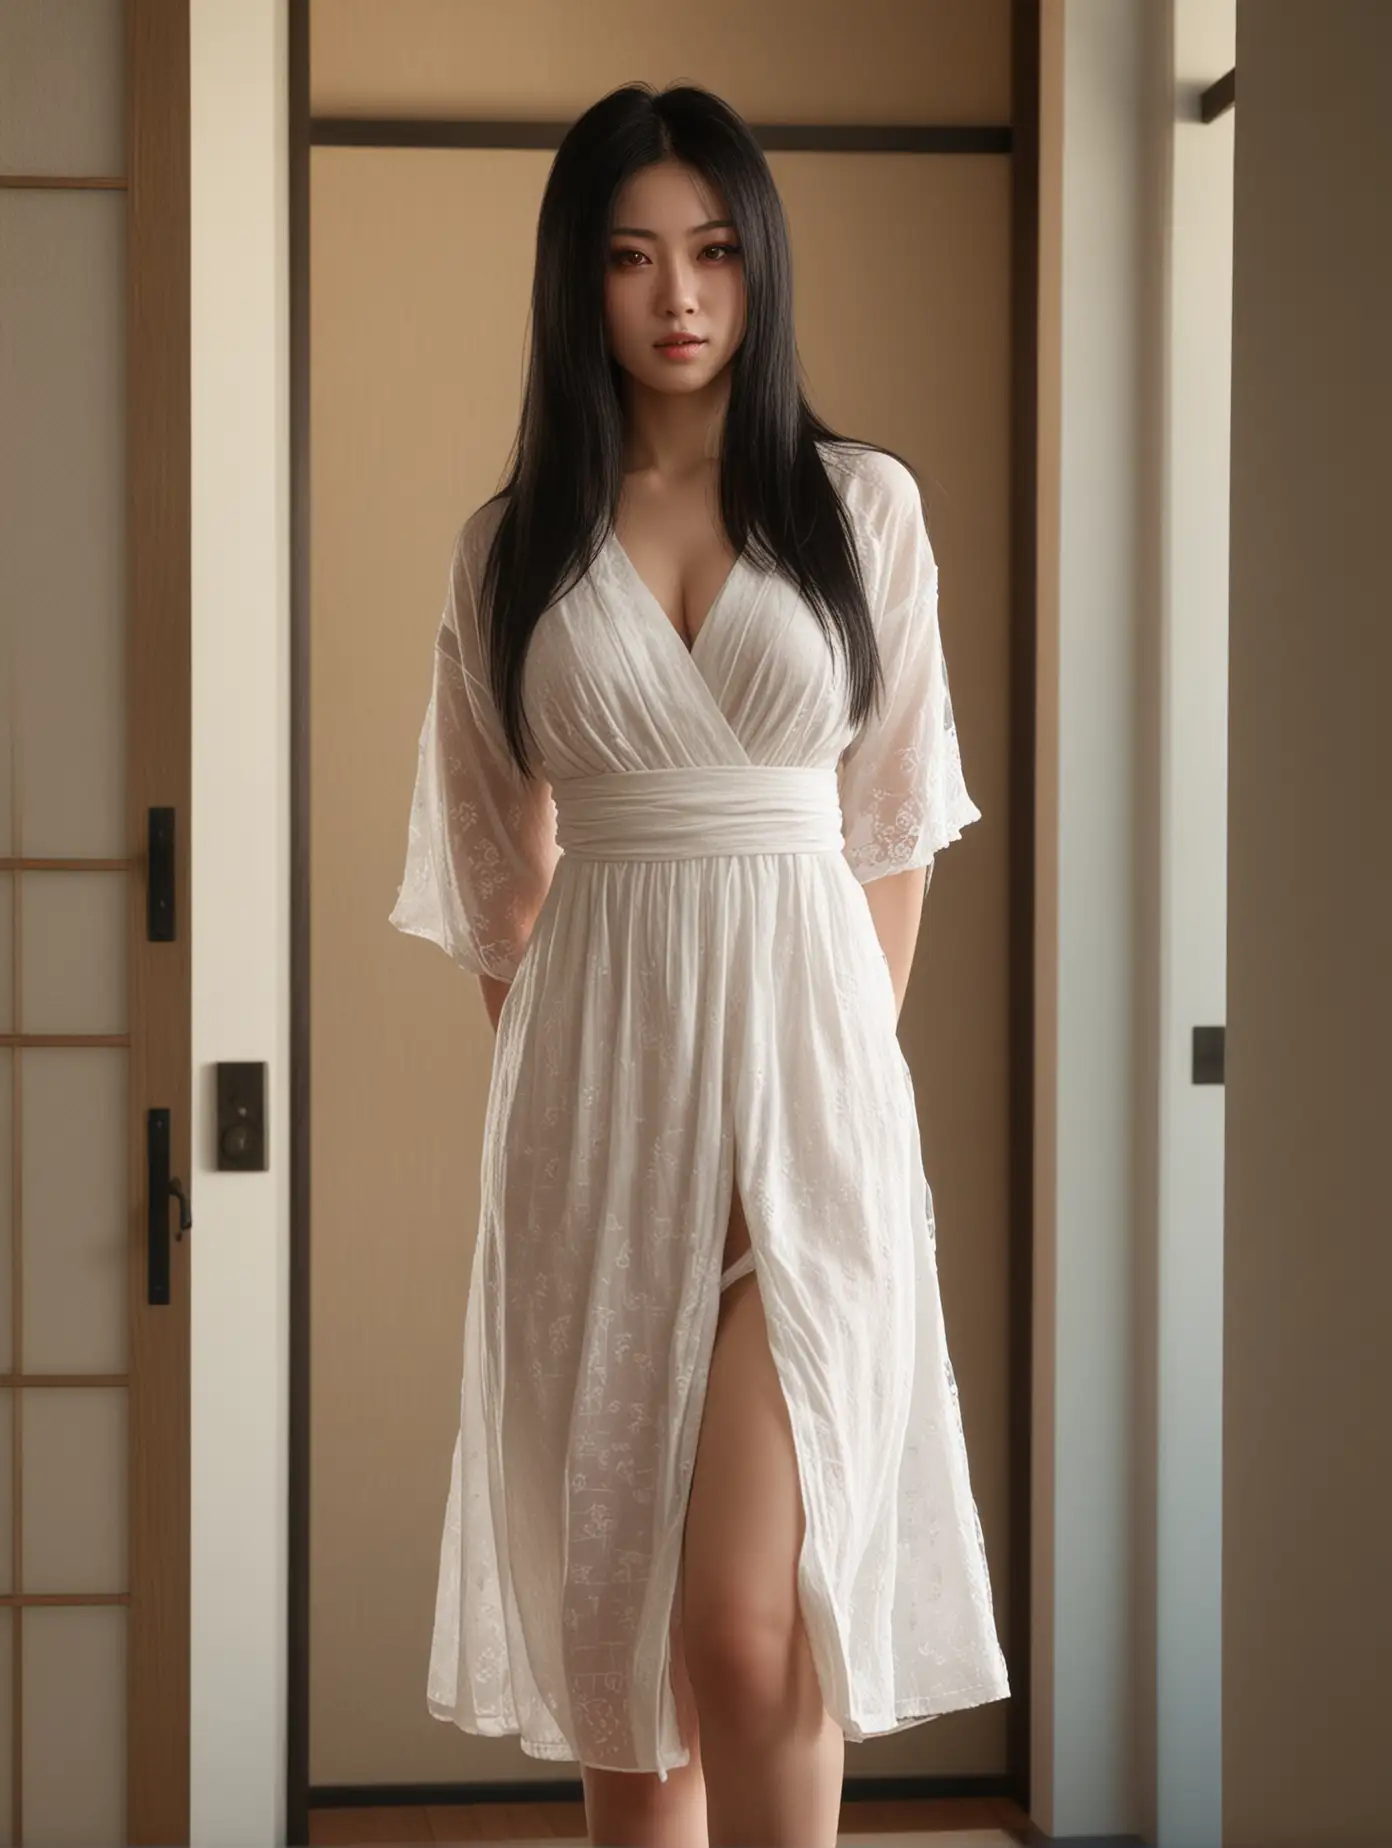 Hasshaku-sama, 8ft tall pale voluptuous Japanese woman, long straight black hair, dark red eyes, tight soft white summer dress, standing over viewer seductively, Japanese room with sliding doors, night time, horror lighting,

highly detailed, random details, imperfection, detailed face, detailed body, detailed skin textures, skin pores, detailed colours hues tones patterns,